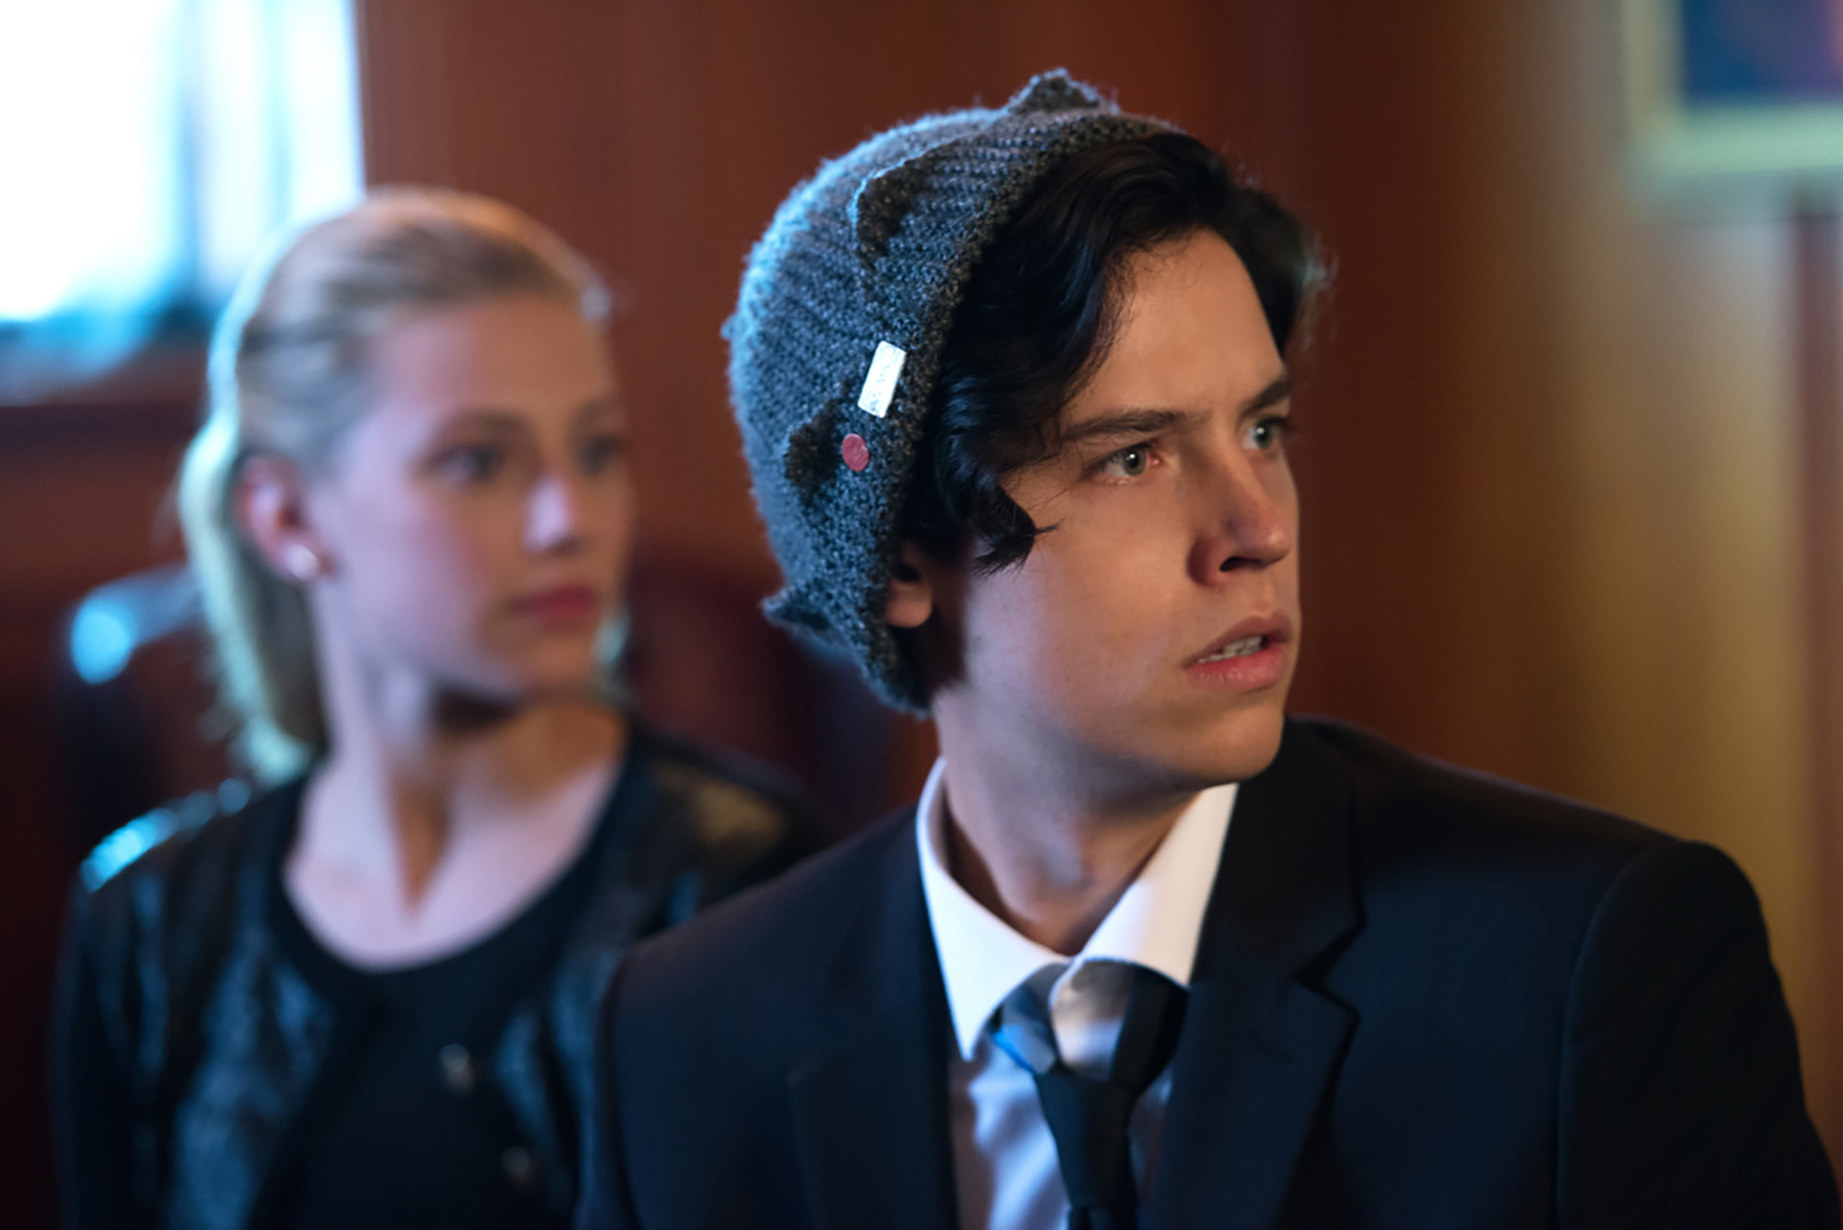 Jughead looks to his left wearing a beanie and a suit